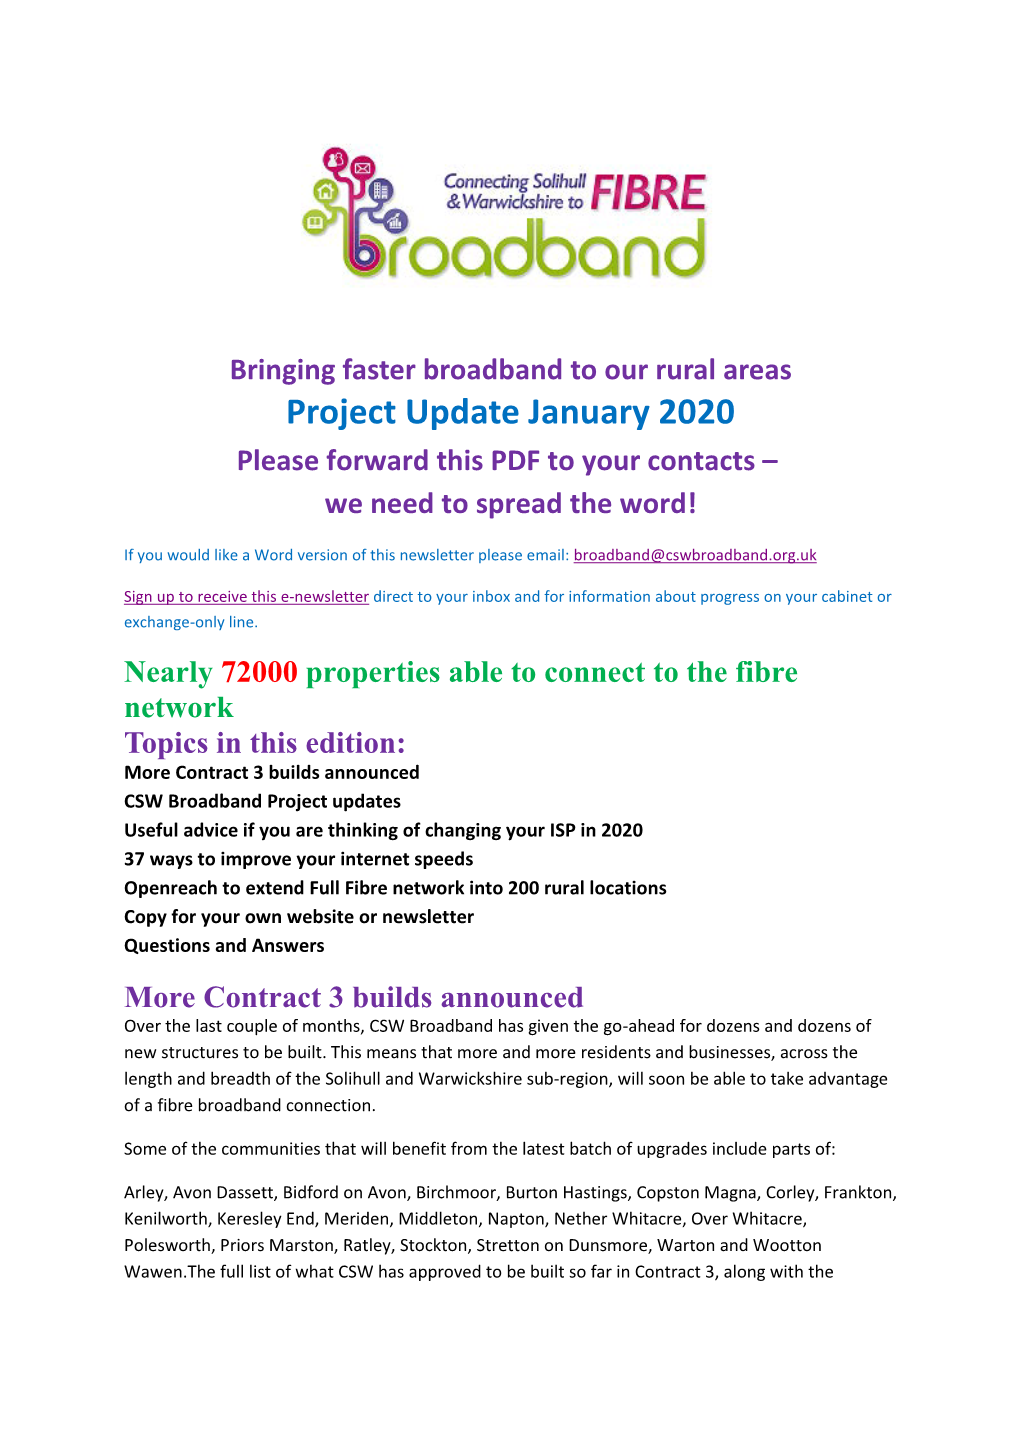 Project Update January 2020 Please Forward This PDF to Your Contacts – We Need to Spread the Word!